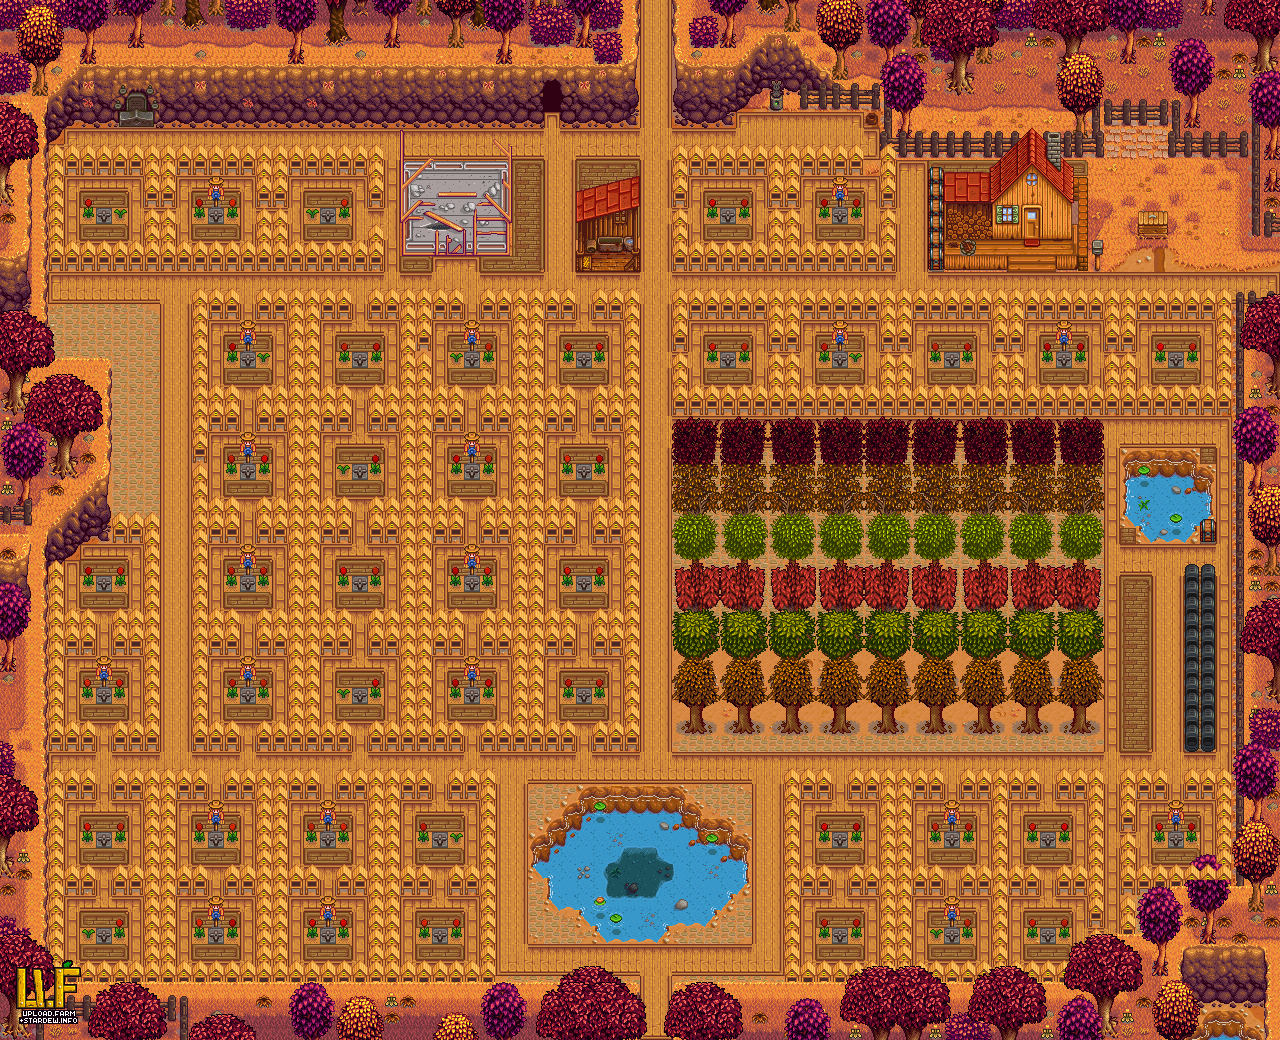 quality sprinkler greenhouse layout